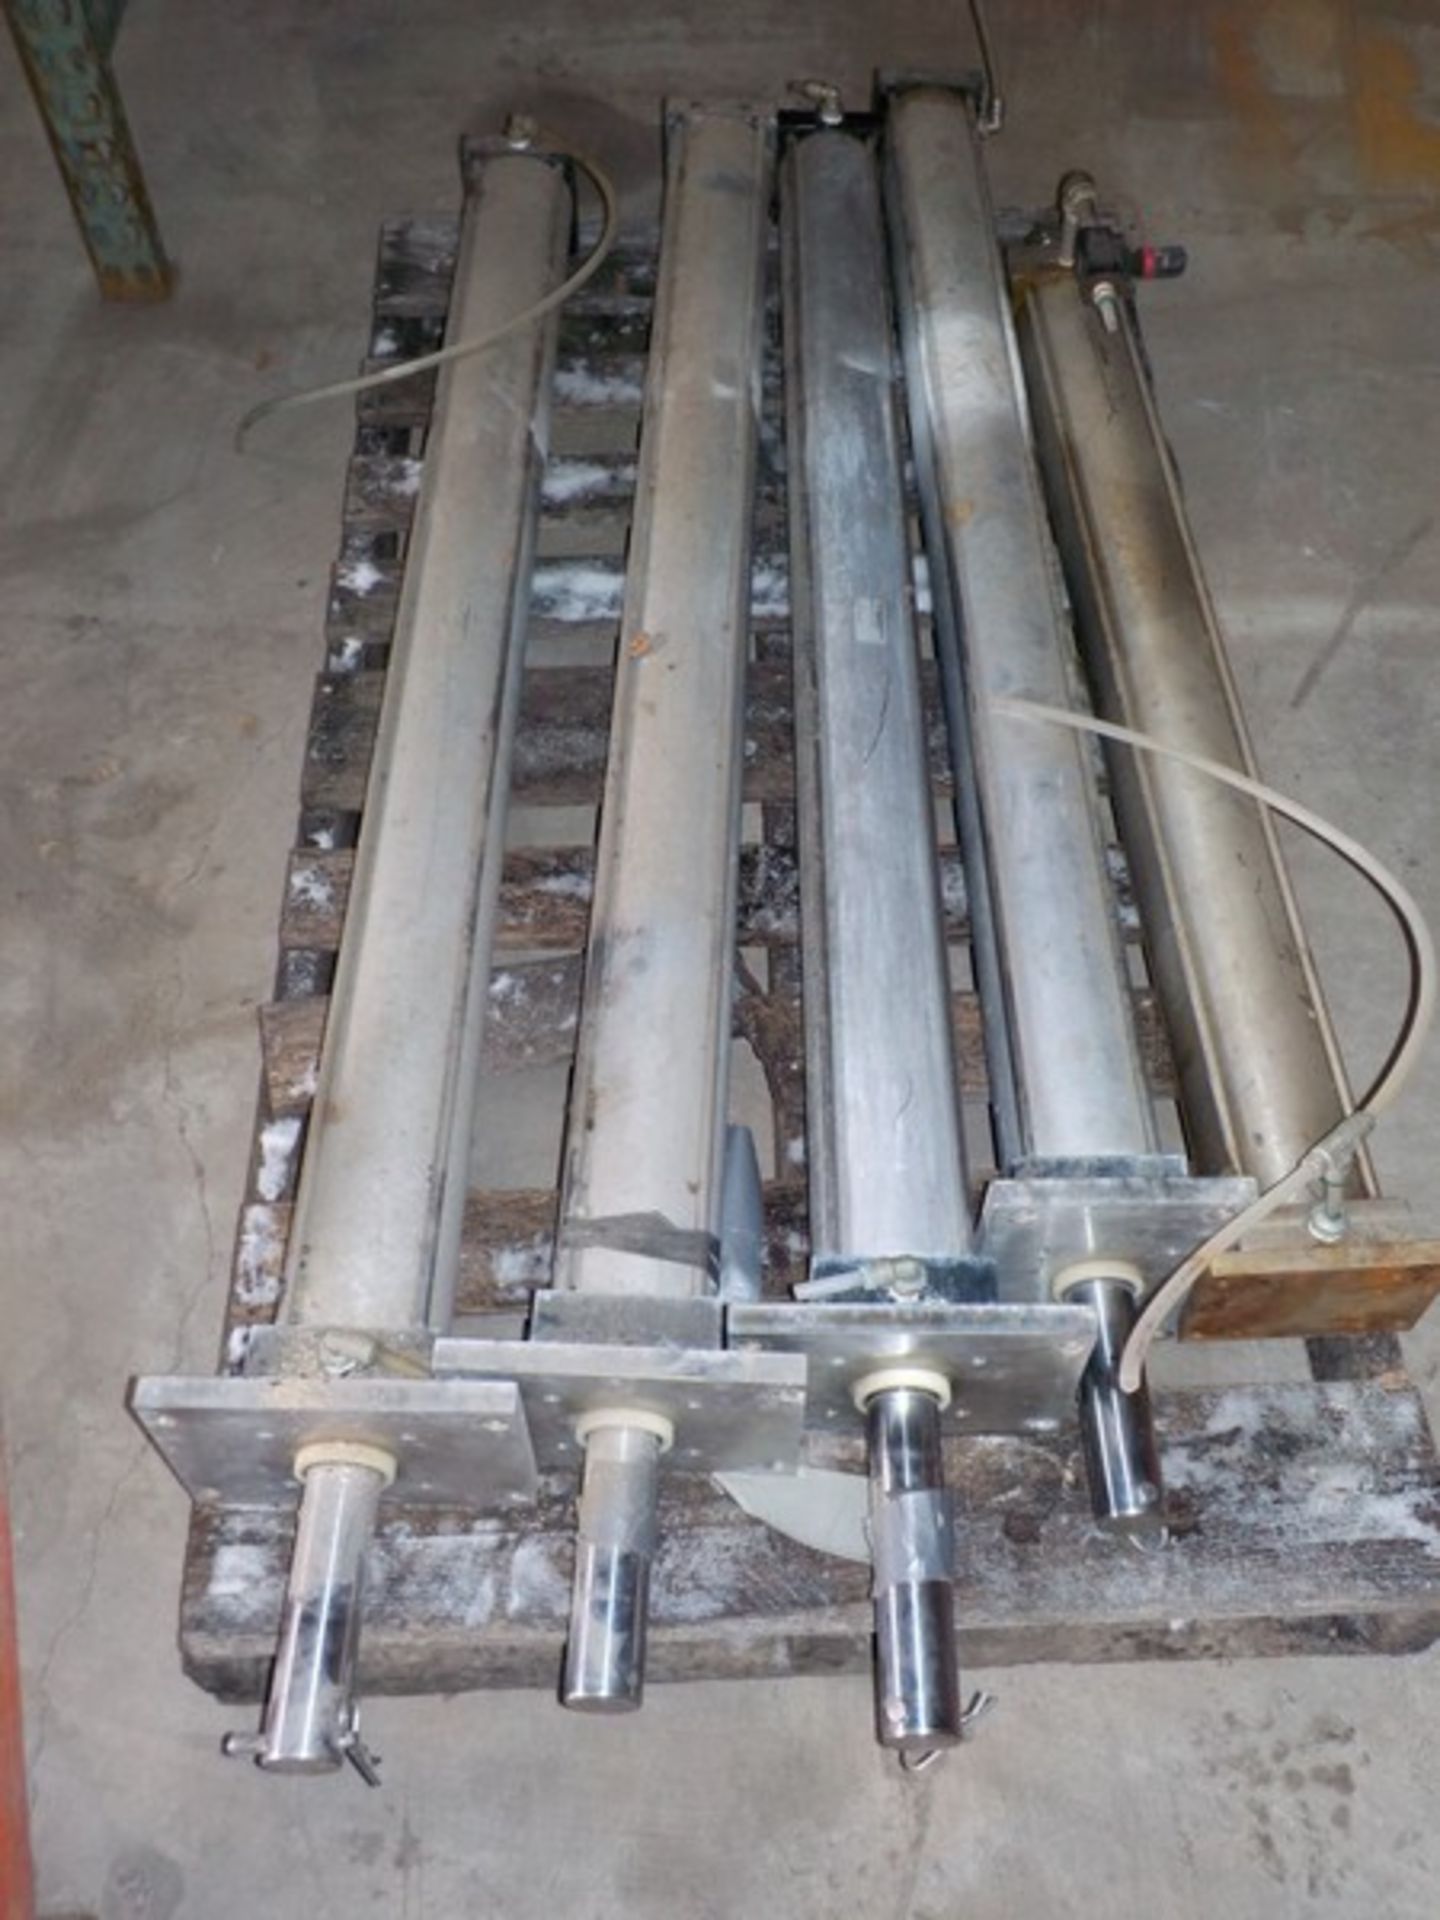 Lot of Stainless Steel Air Cylinders; 13 Cylinders Include (7)-4" X 5", (4) 4"X 28", and (2) 4" X - Image 2 of 2